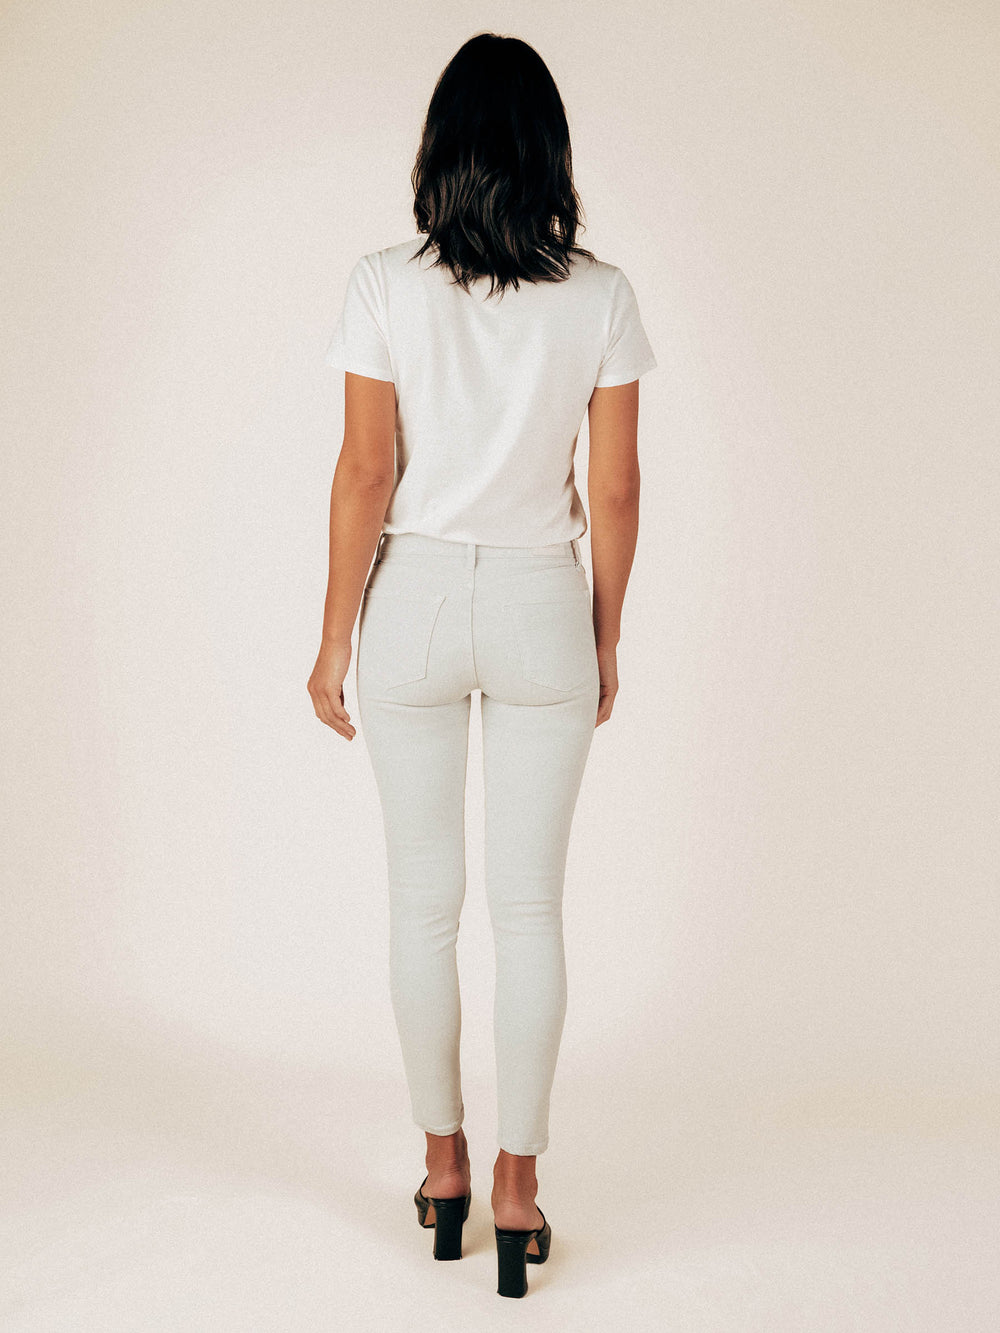 Ice Gray Annie 4-Pocket Pant - Graceful District